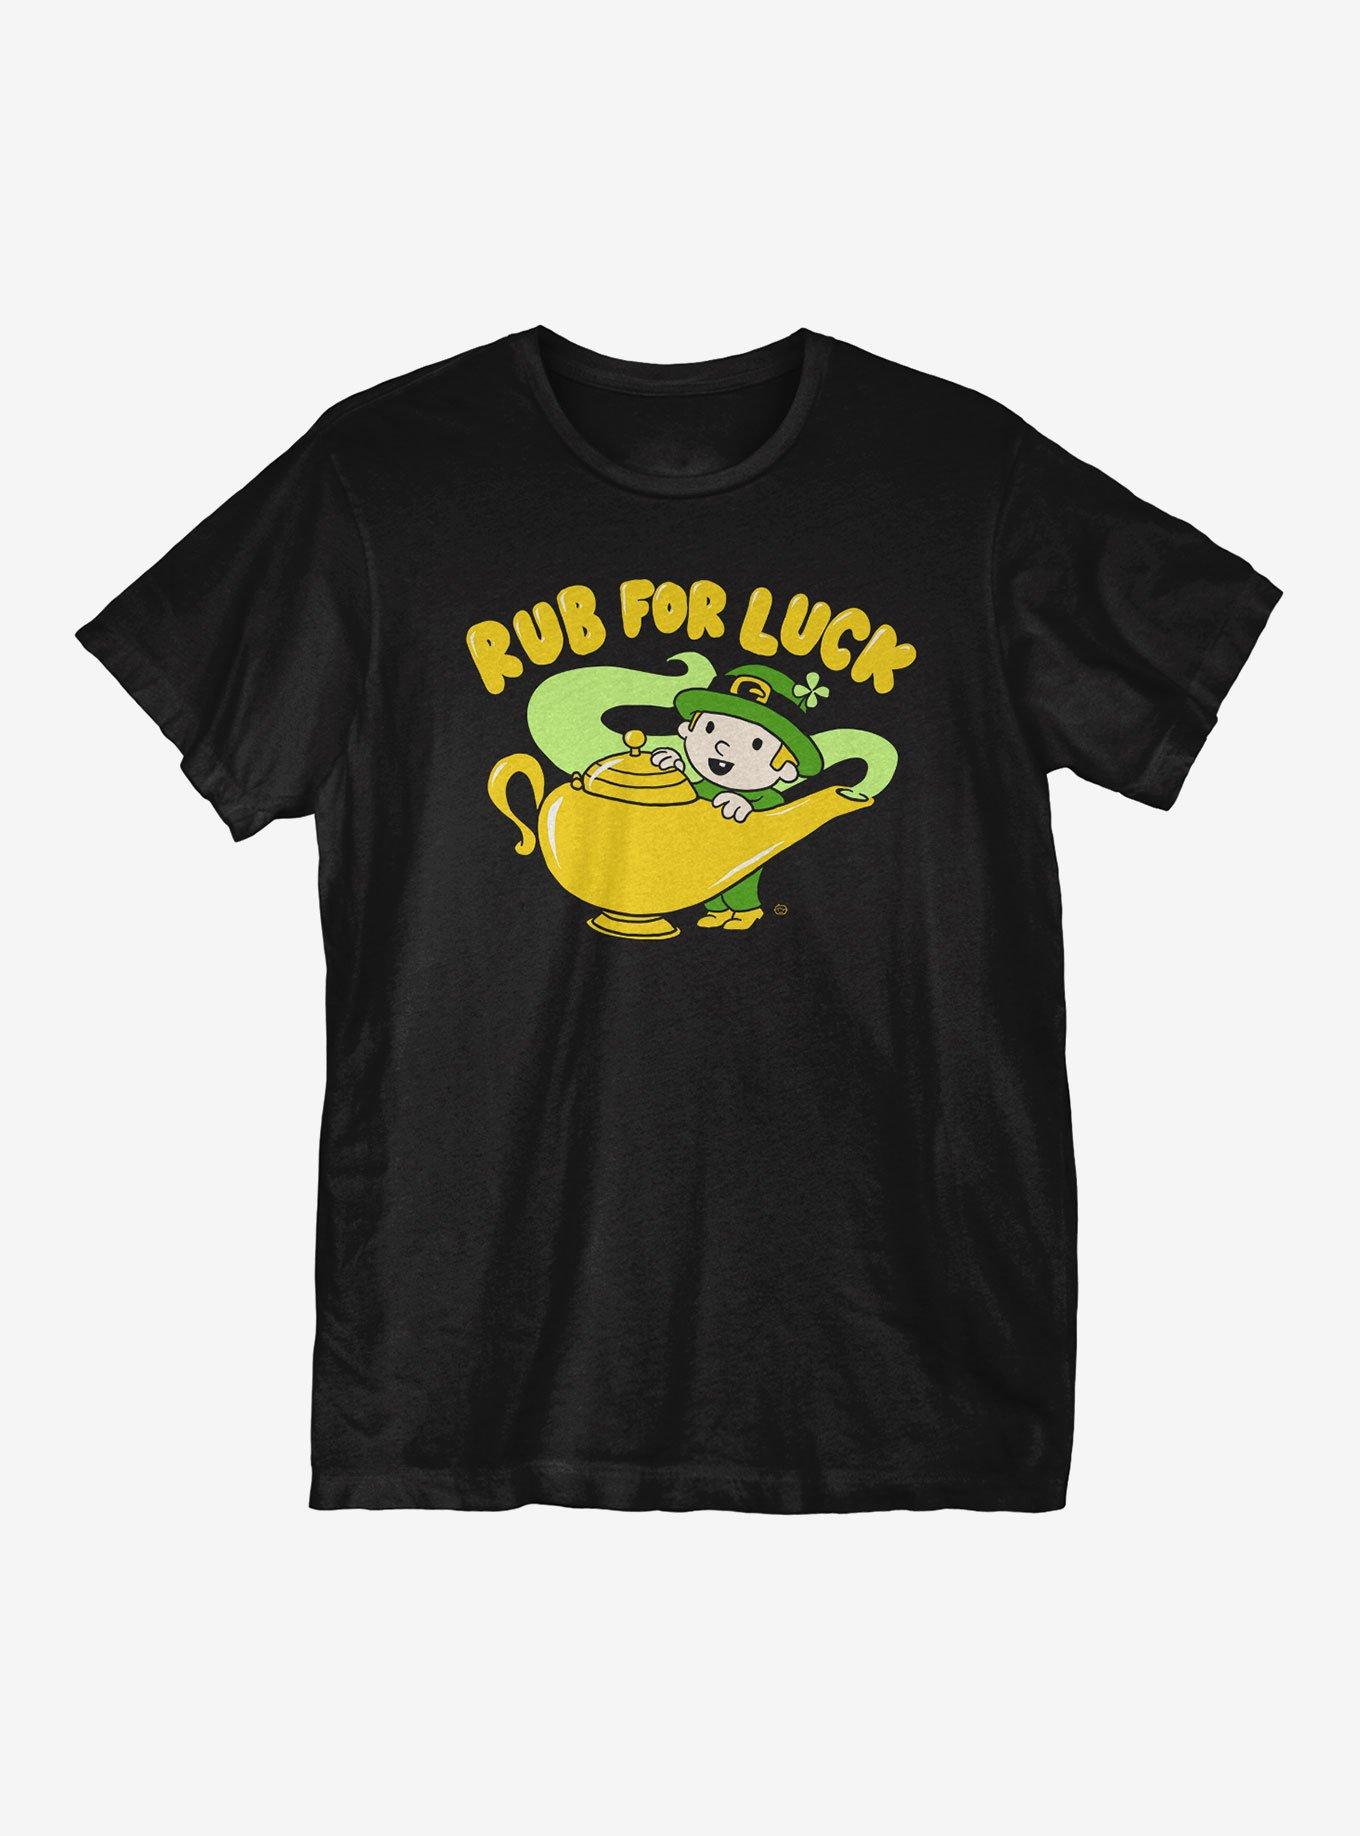 St Patrick's Day Rub for Luck T-Shirt, BLACK, hi-res